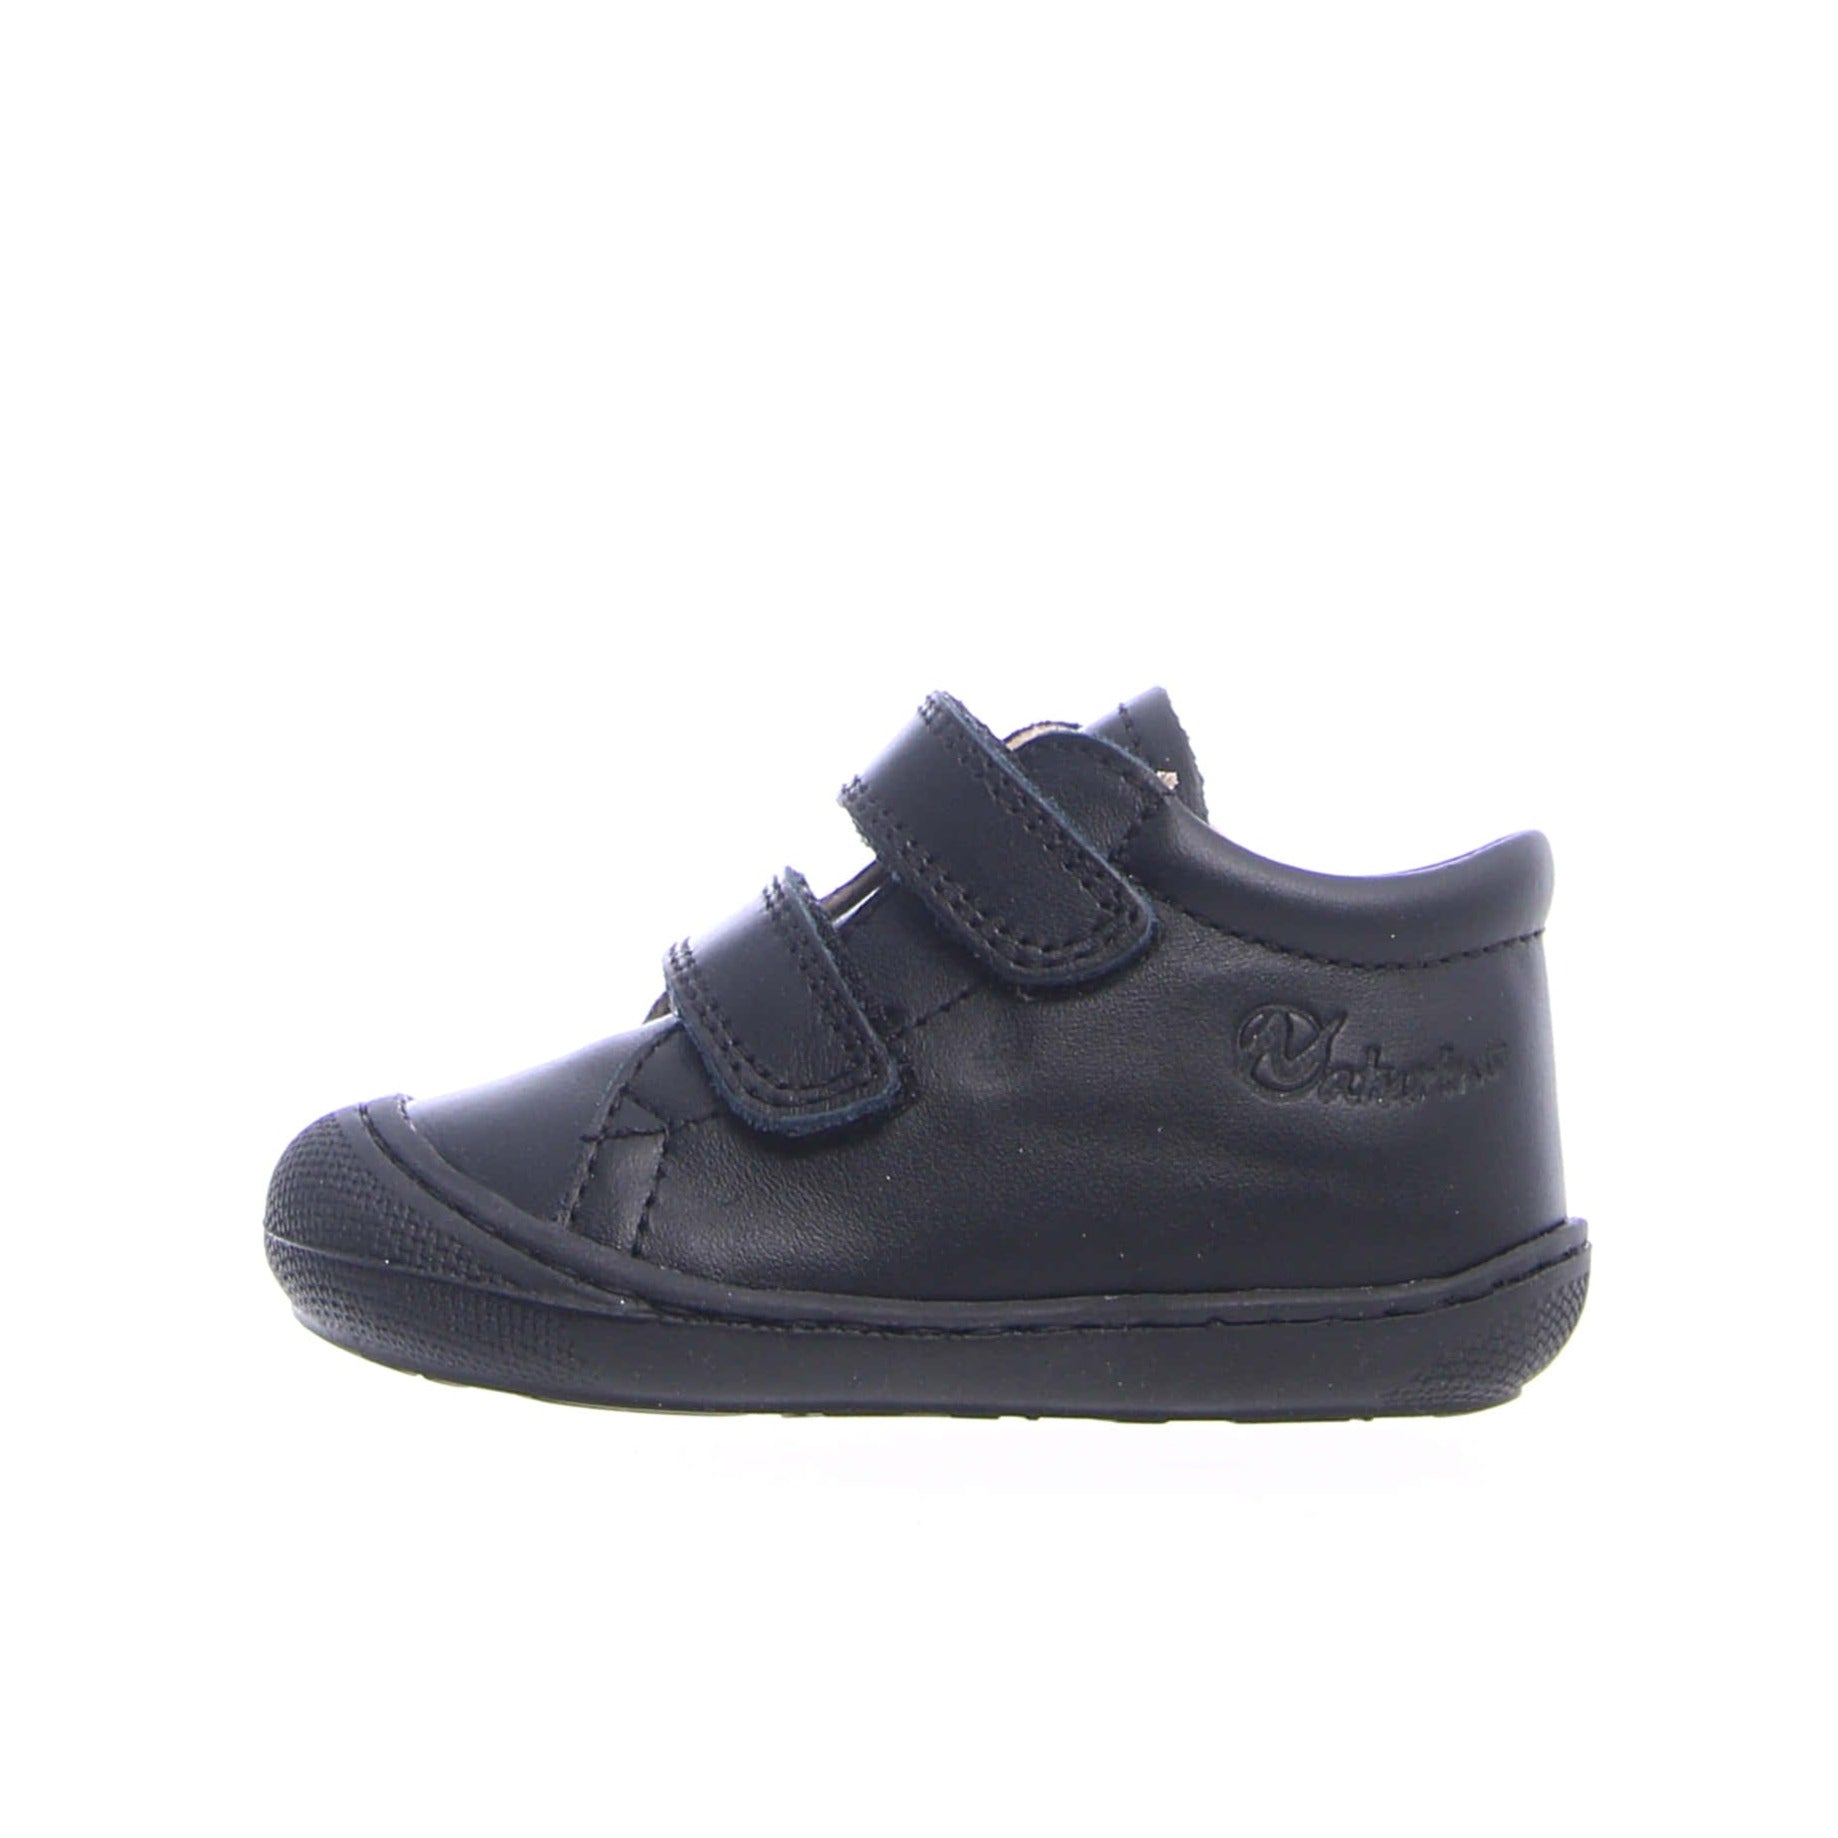 Naturino Cocoon VL - Nappa Leather First Step Shoes - Black